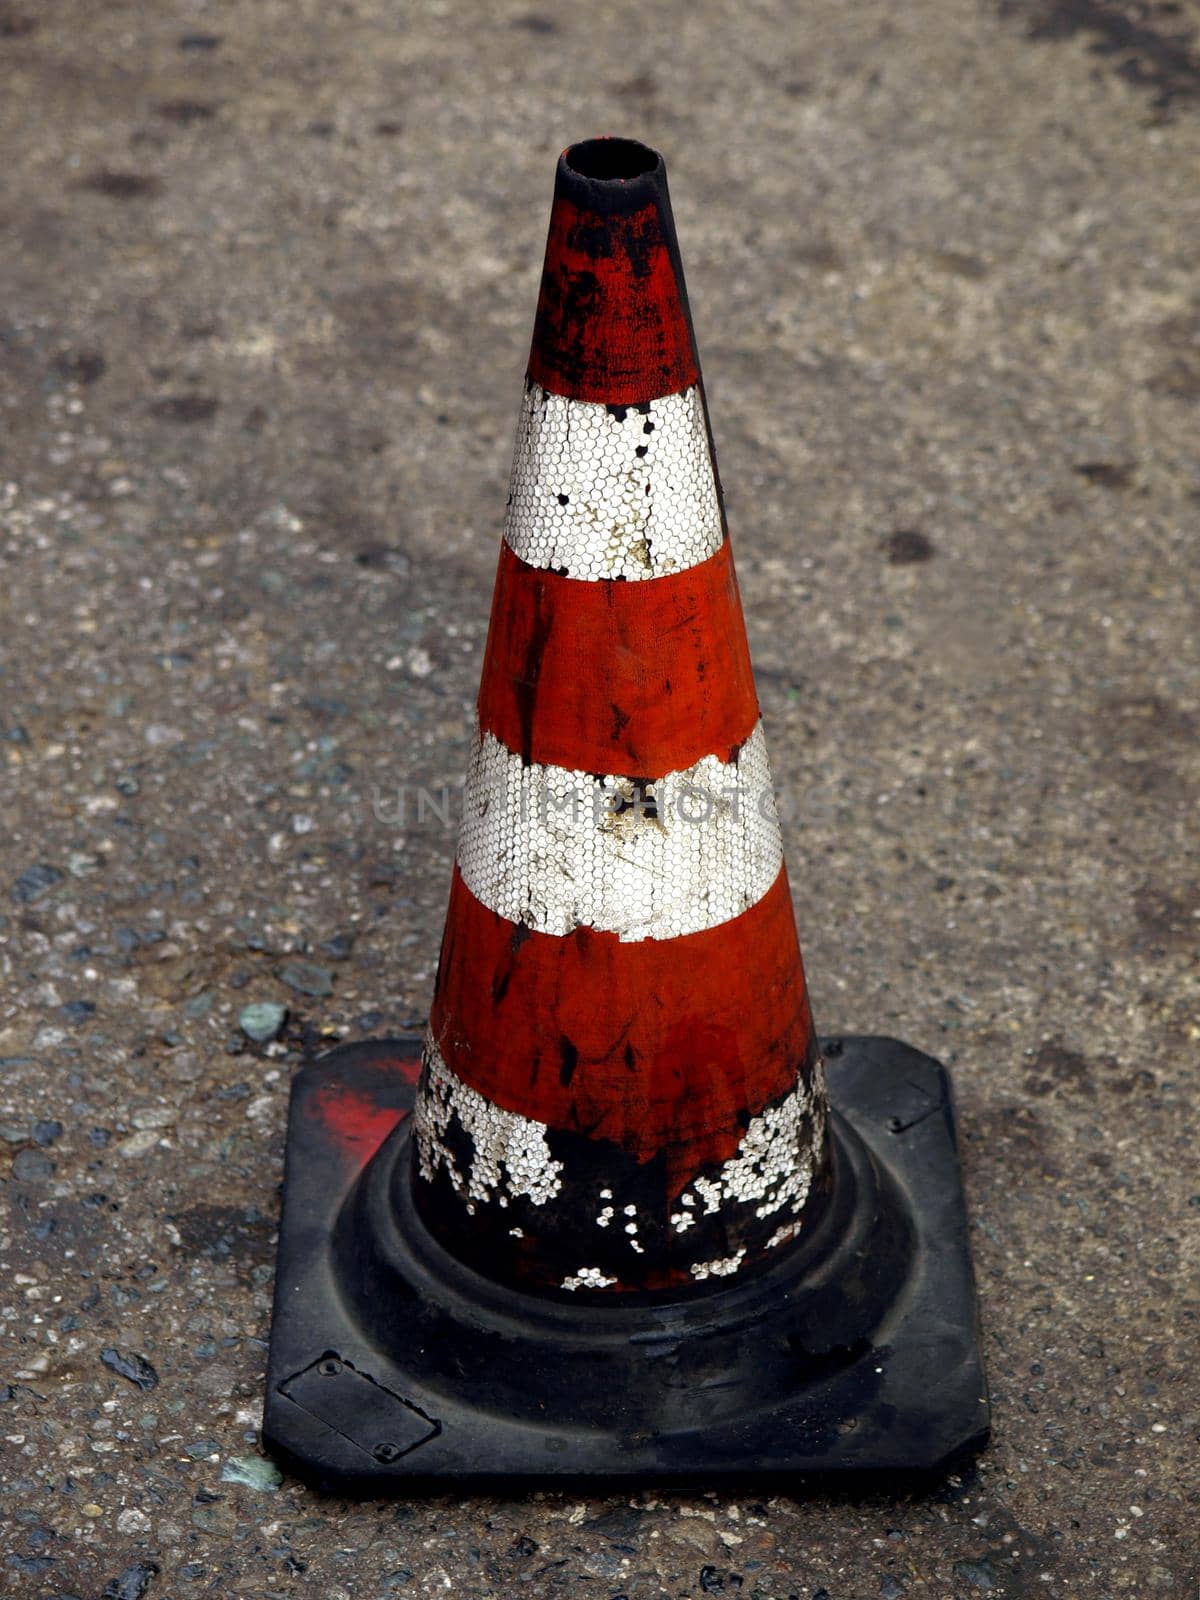 traffic cone to mark road works or temporary obstruction traffic sign